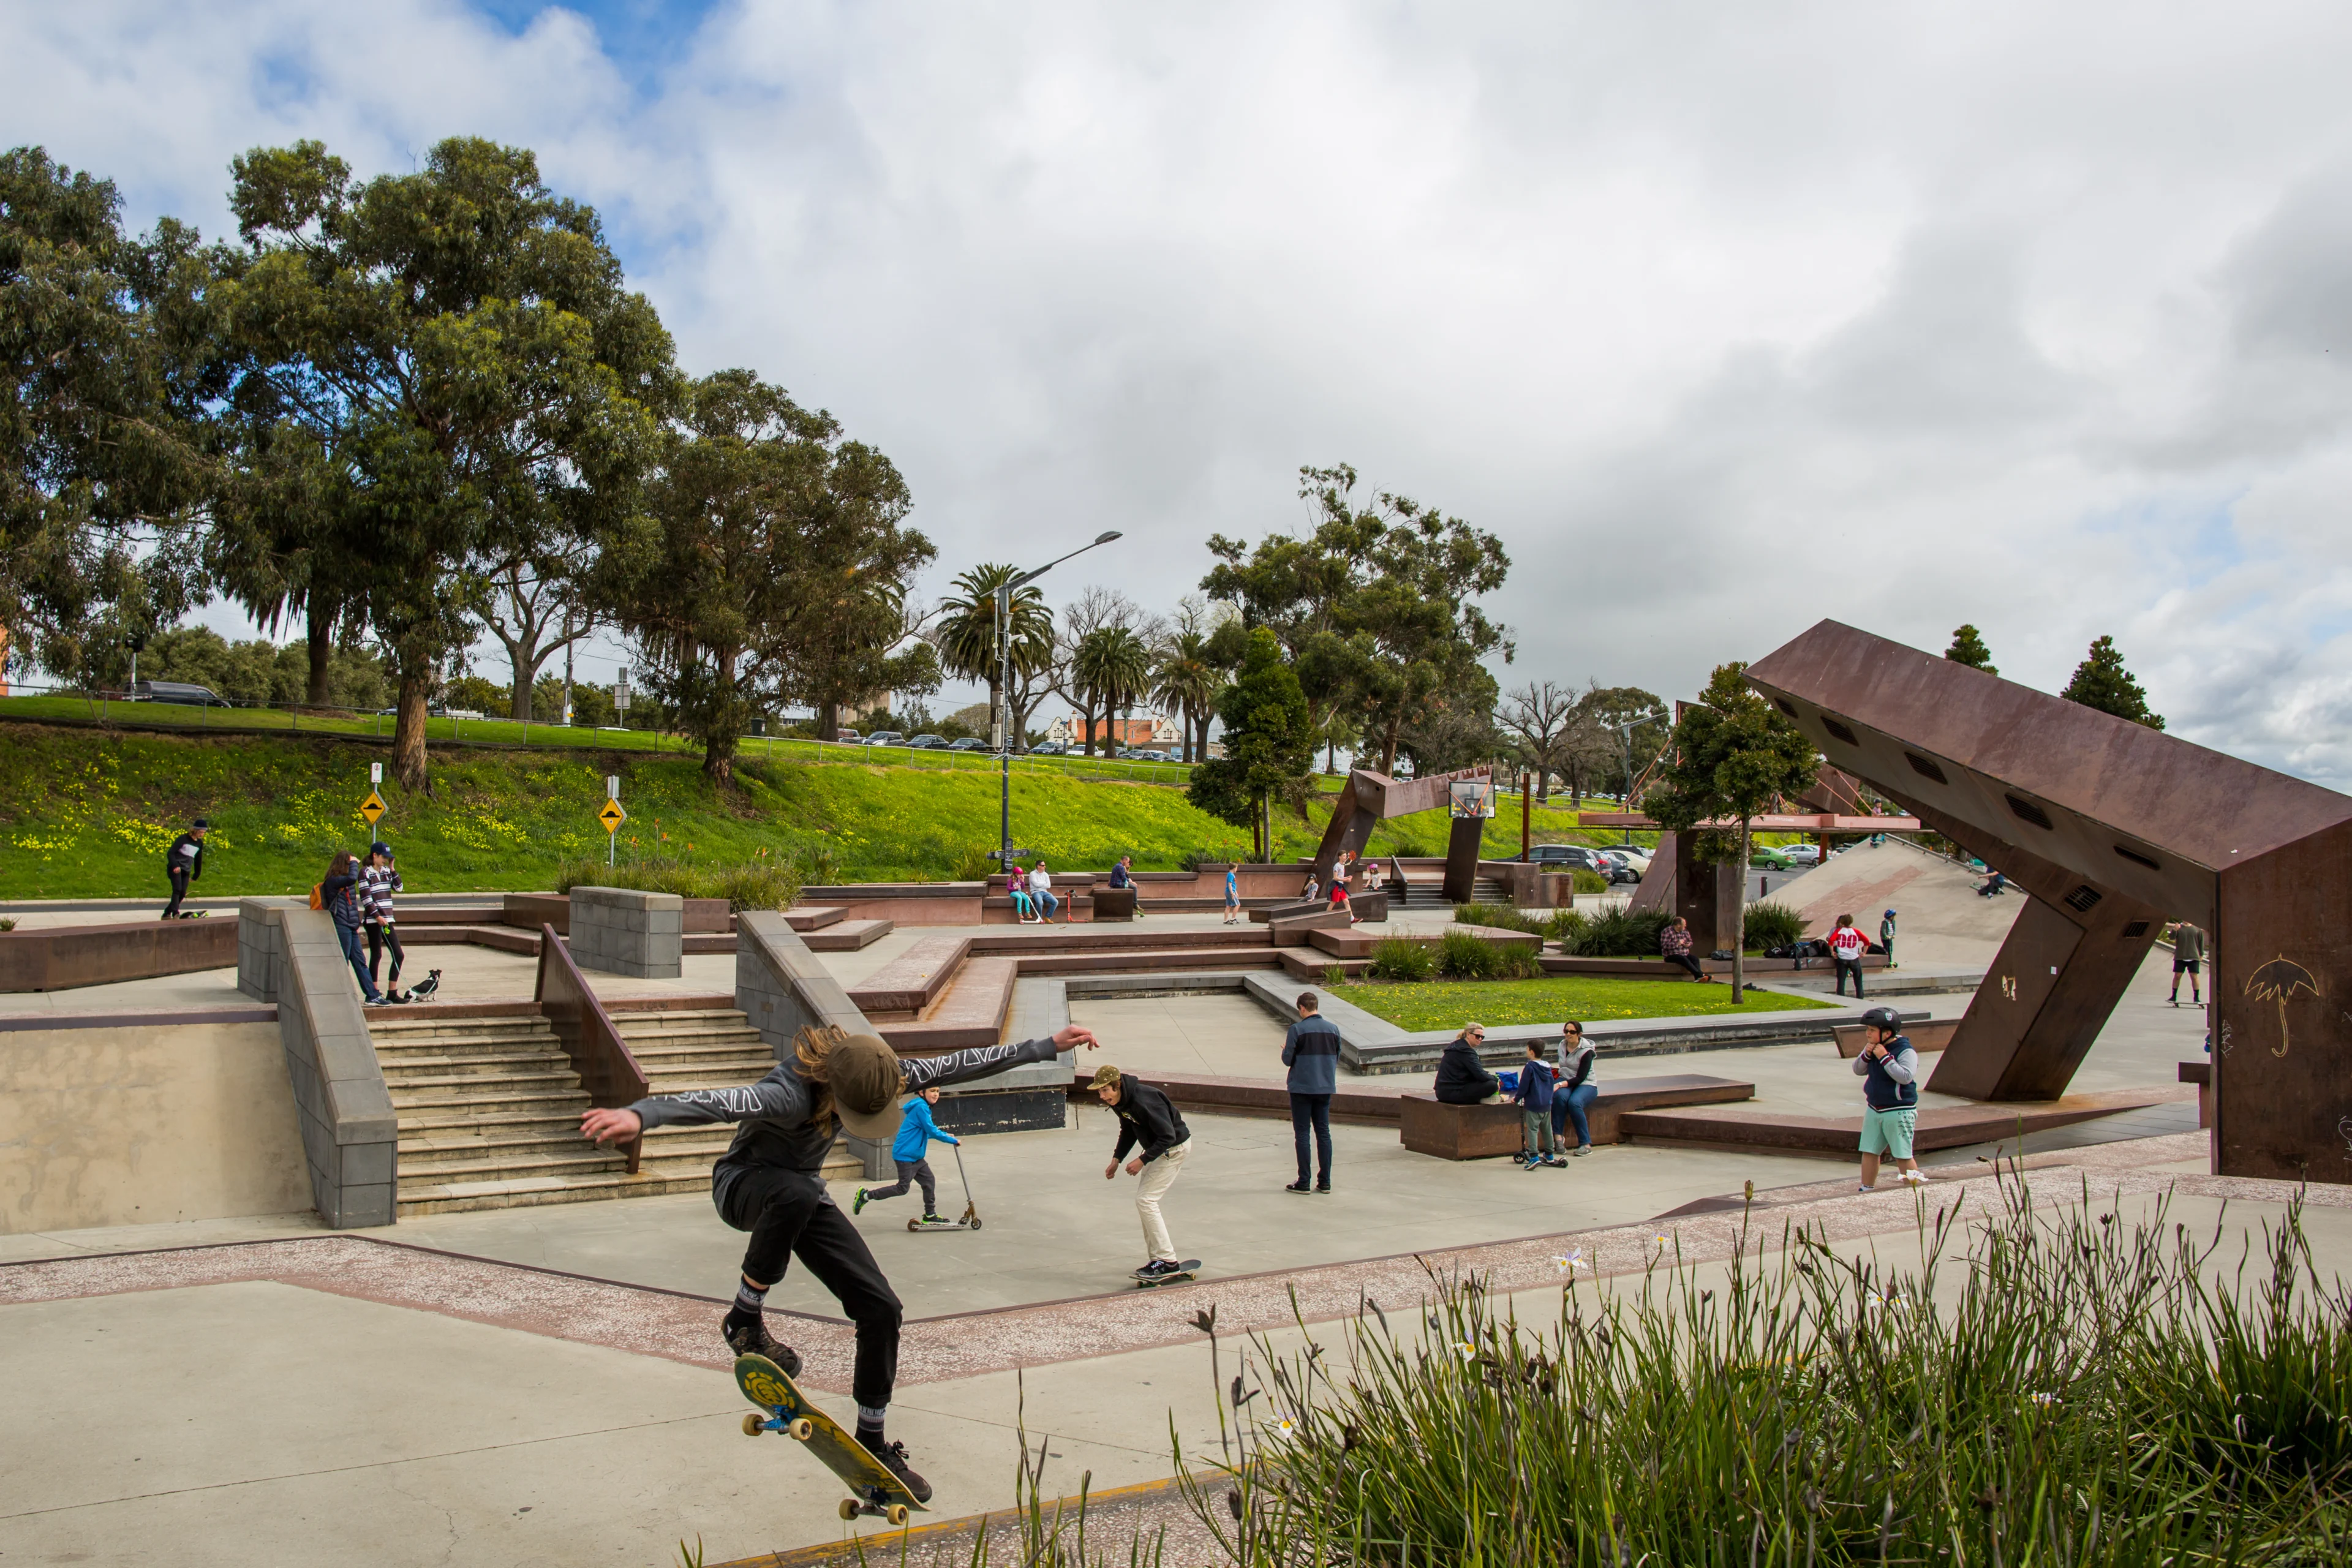 Kids and teenagers on skateboards at the Geelong Waterfront Skate Park